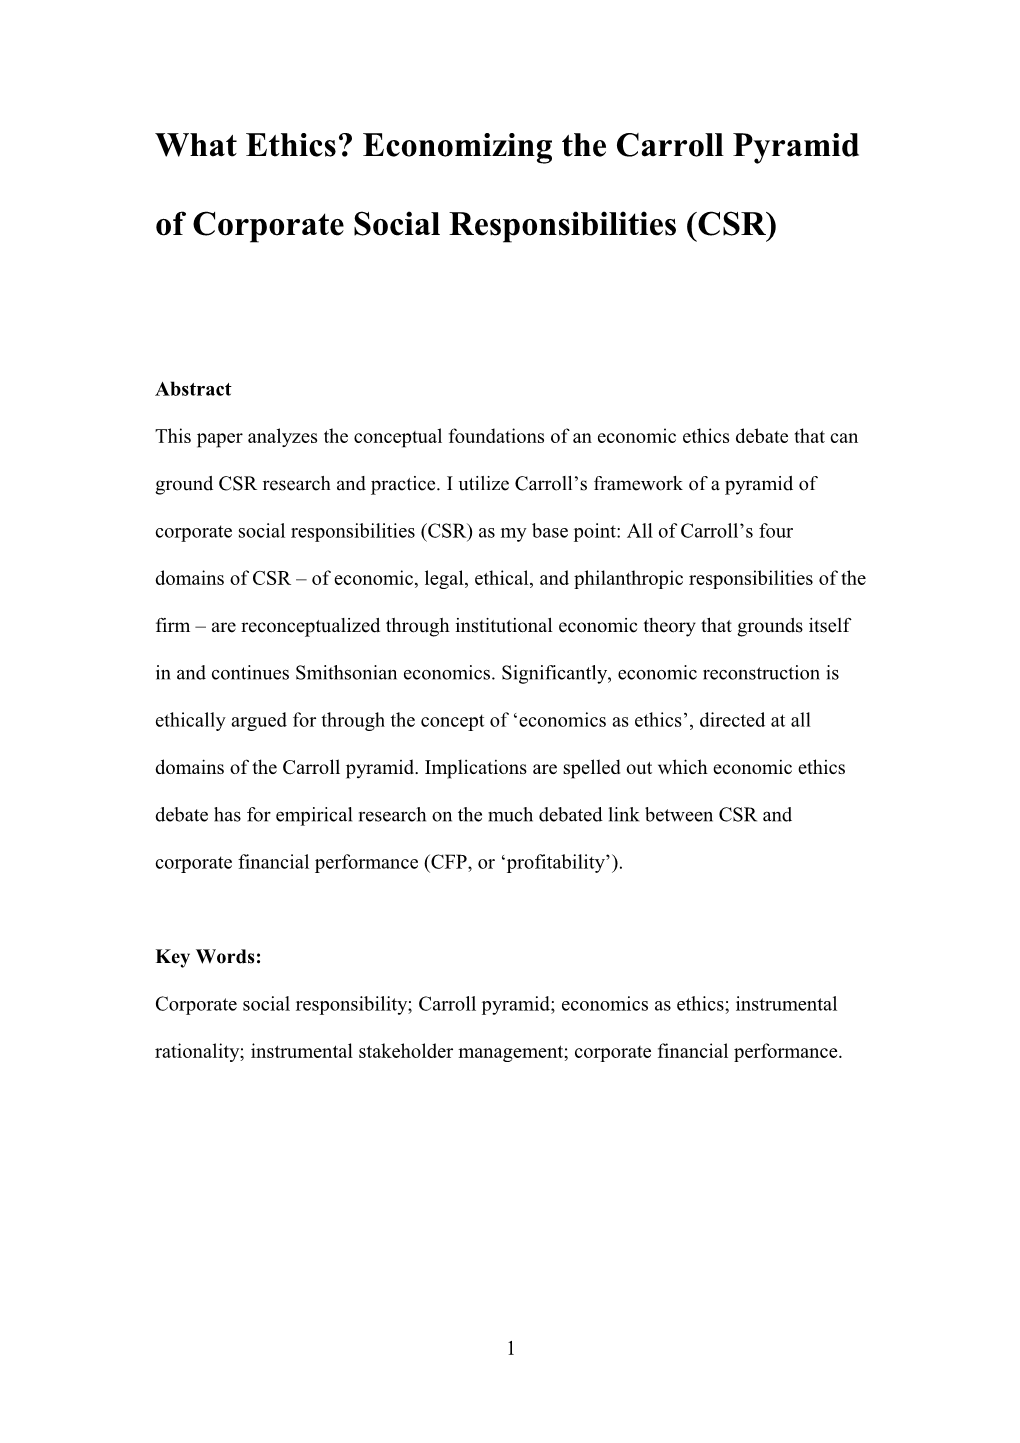 What Ethics? Economizing the Carroll Pyramid of Corporate Social Responsibilities (CSR)